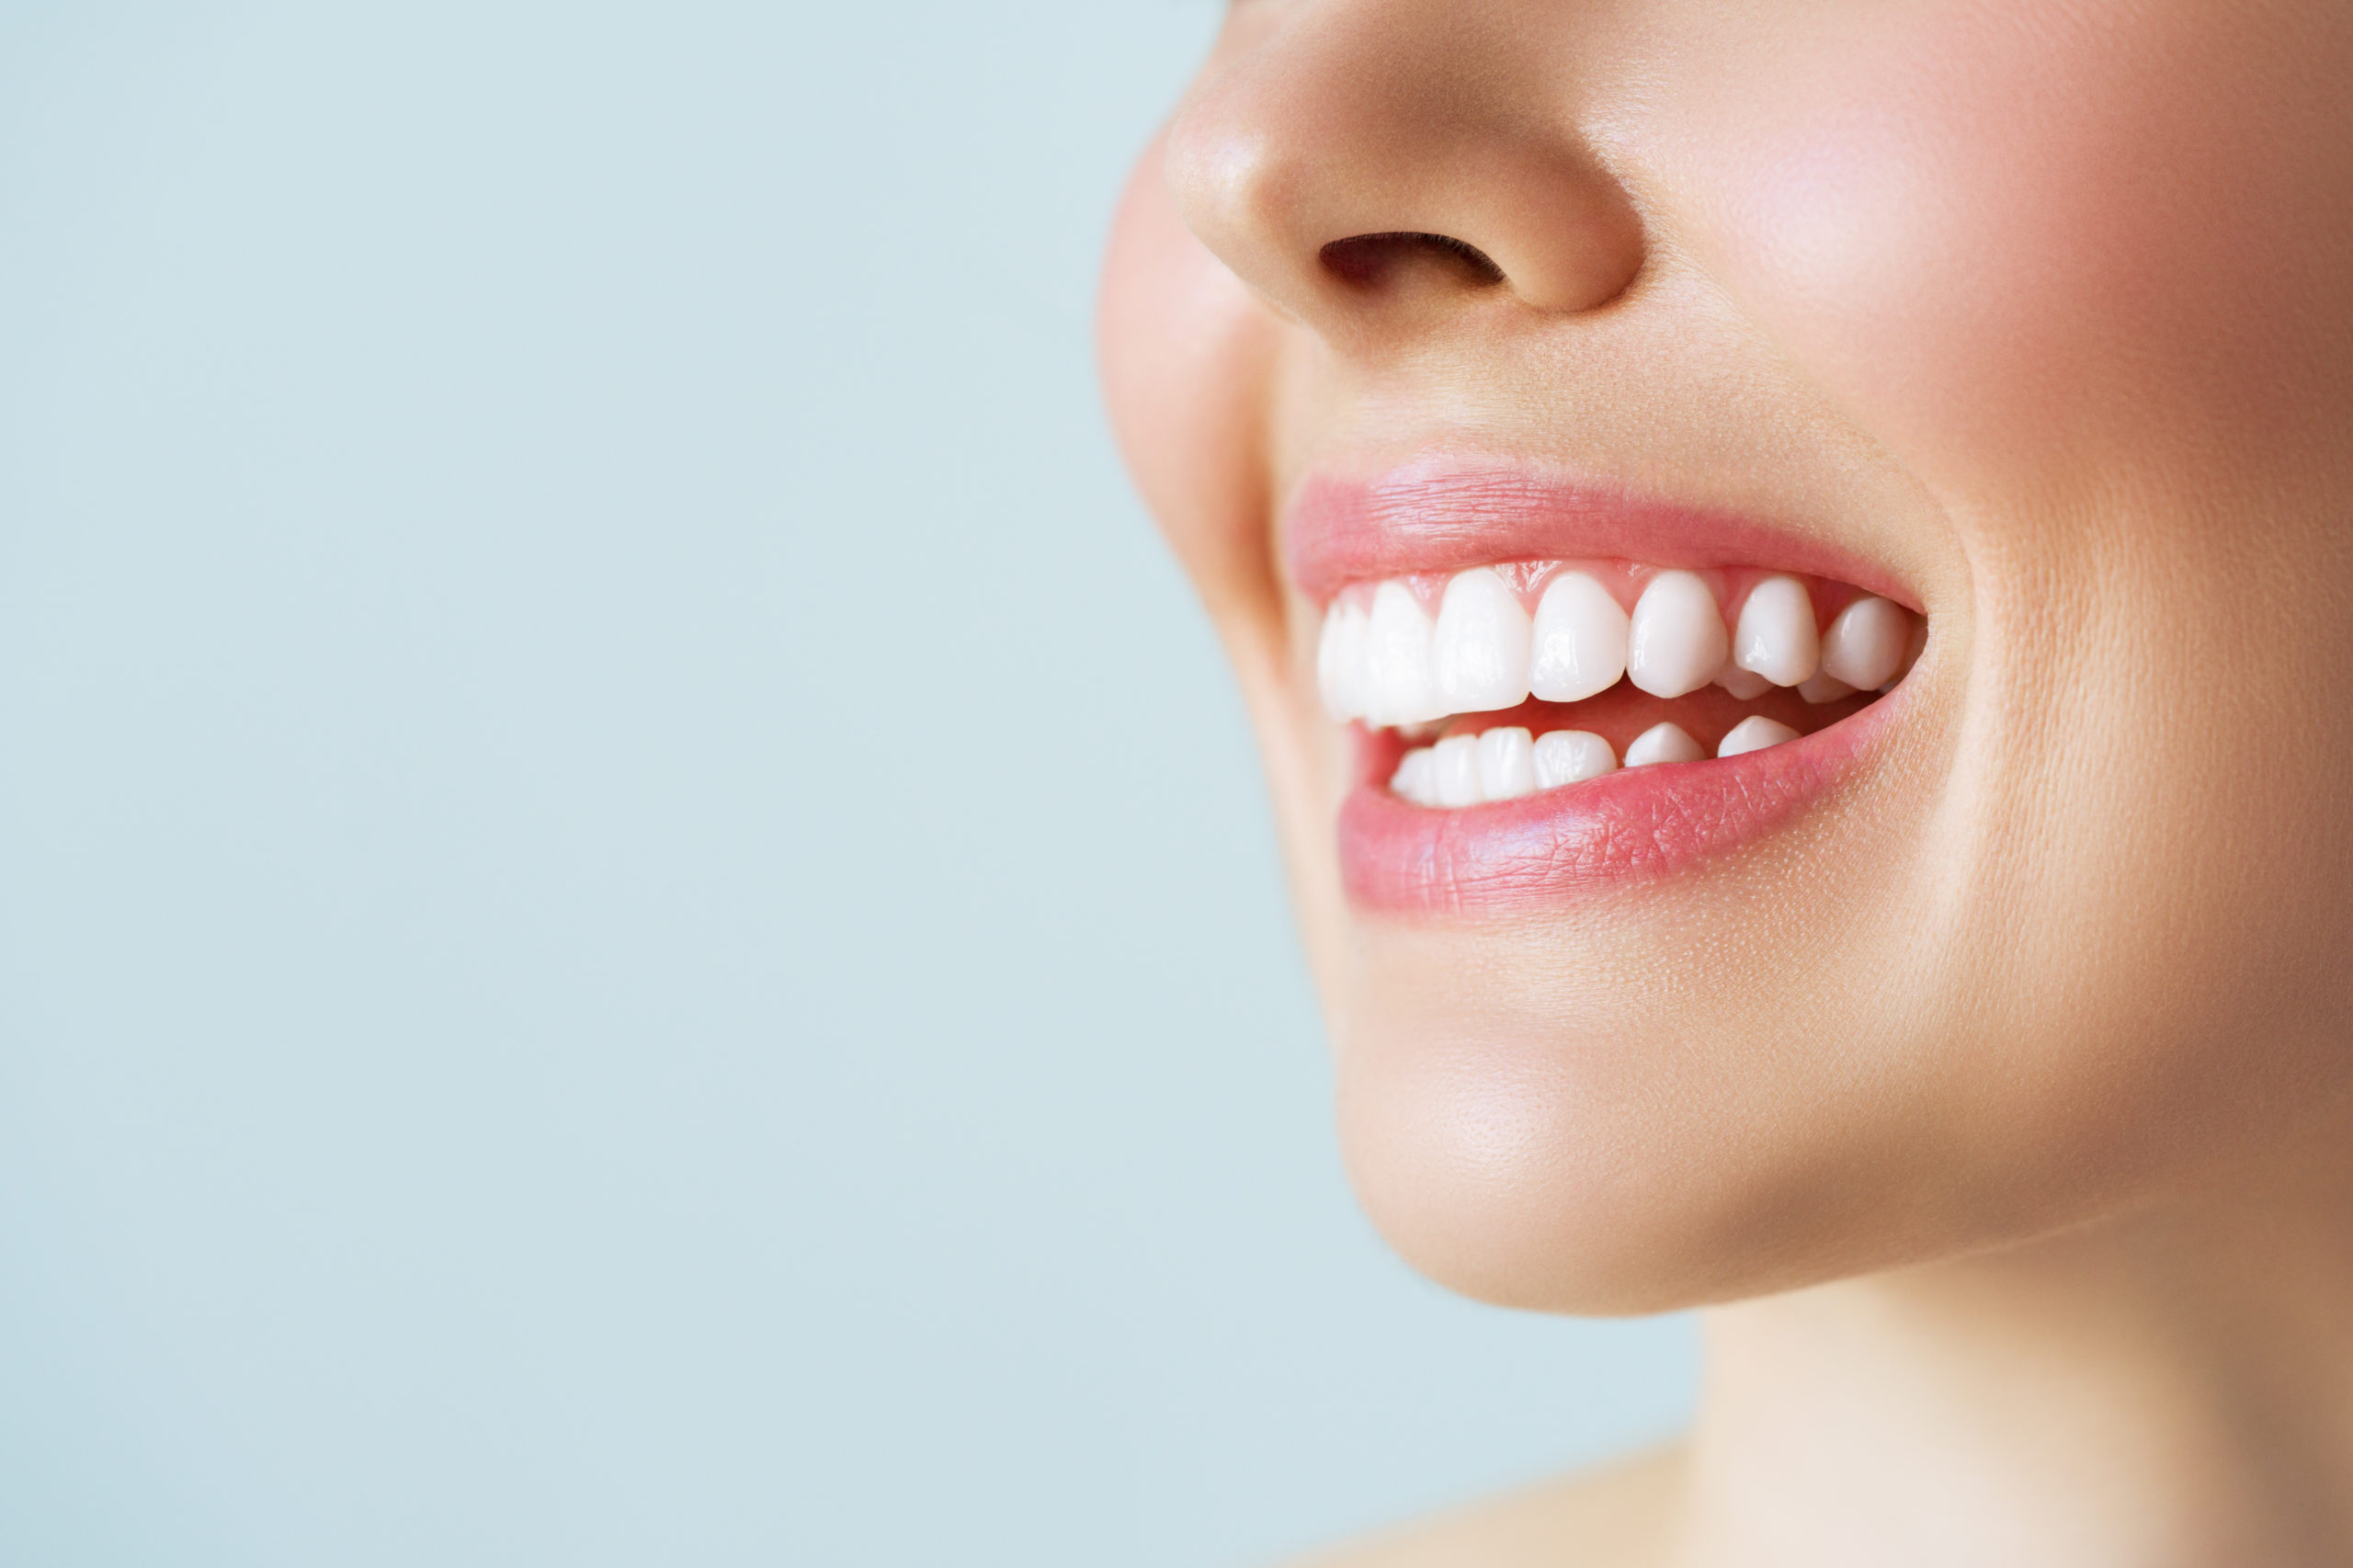 Perfect Healthy Teeth Smile Of A Young Woman. Teeth Whitening. Dental Care, Stomatology Concept